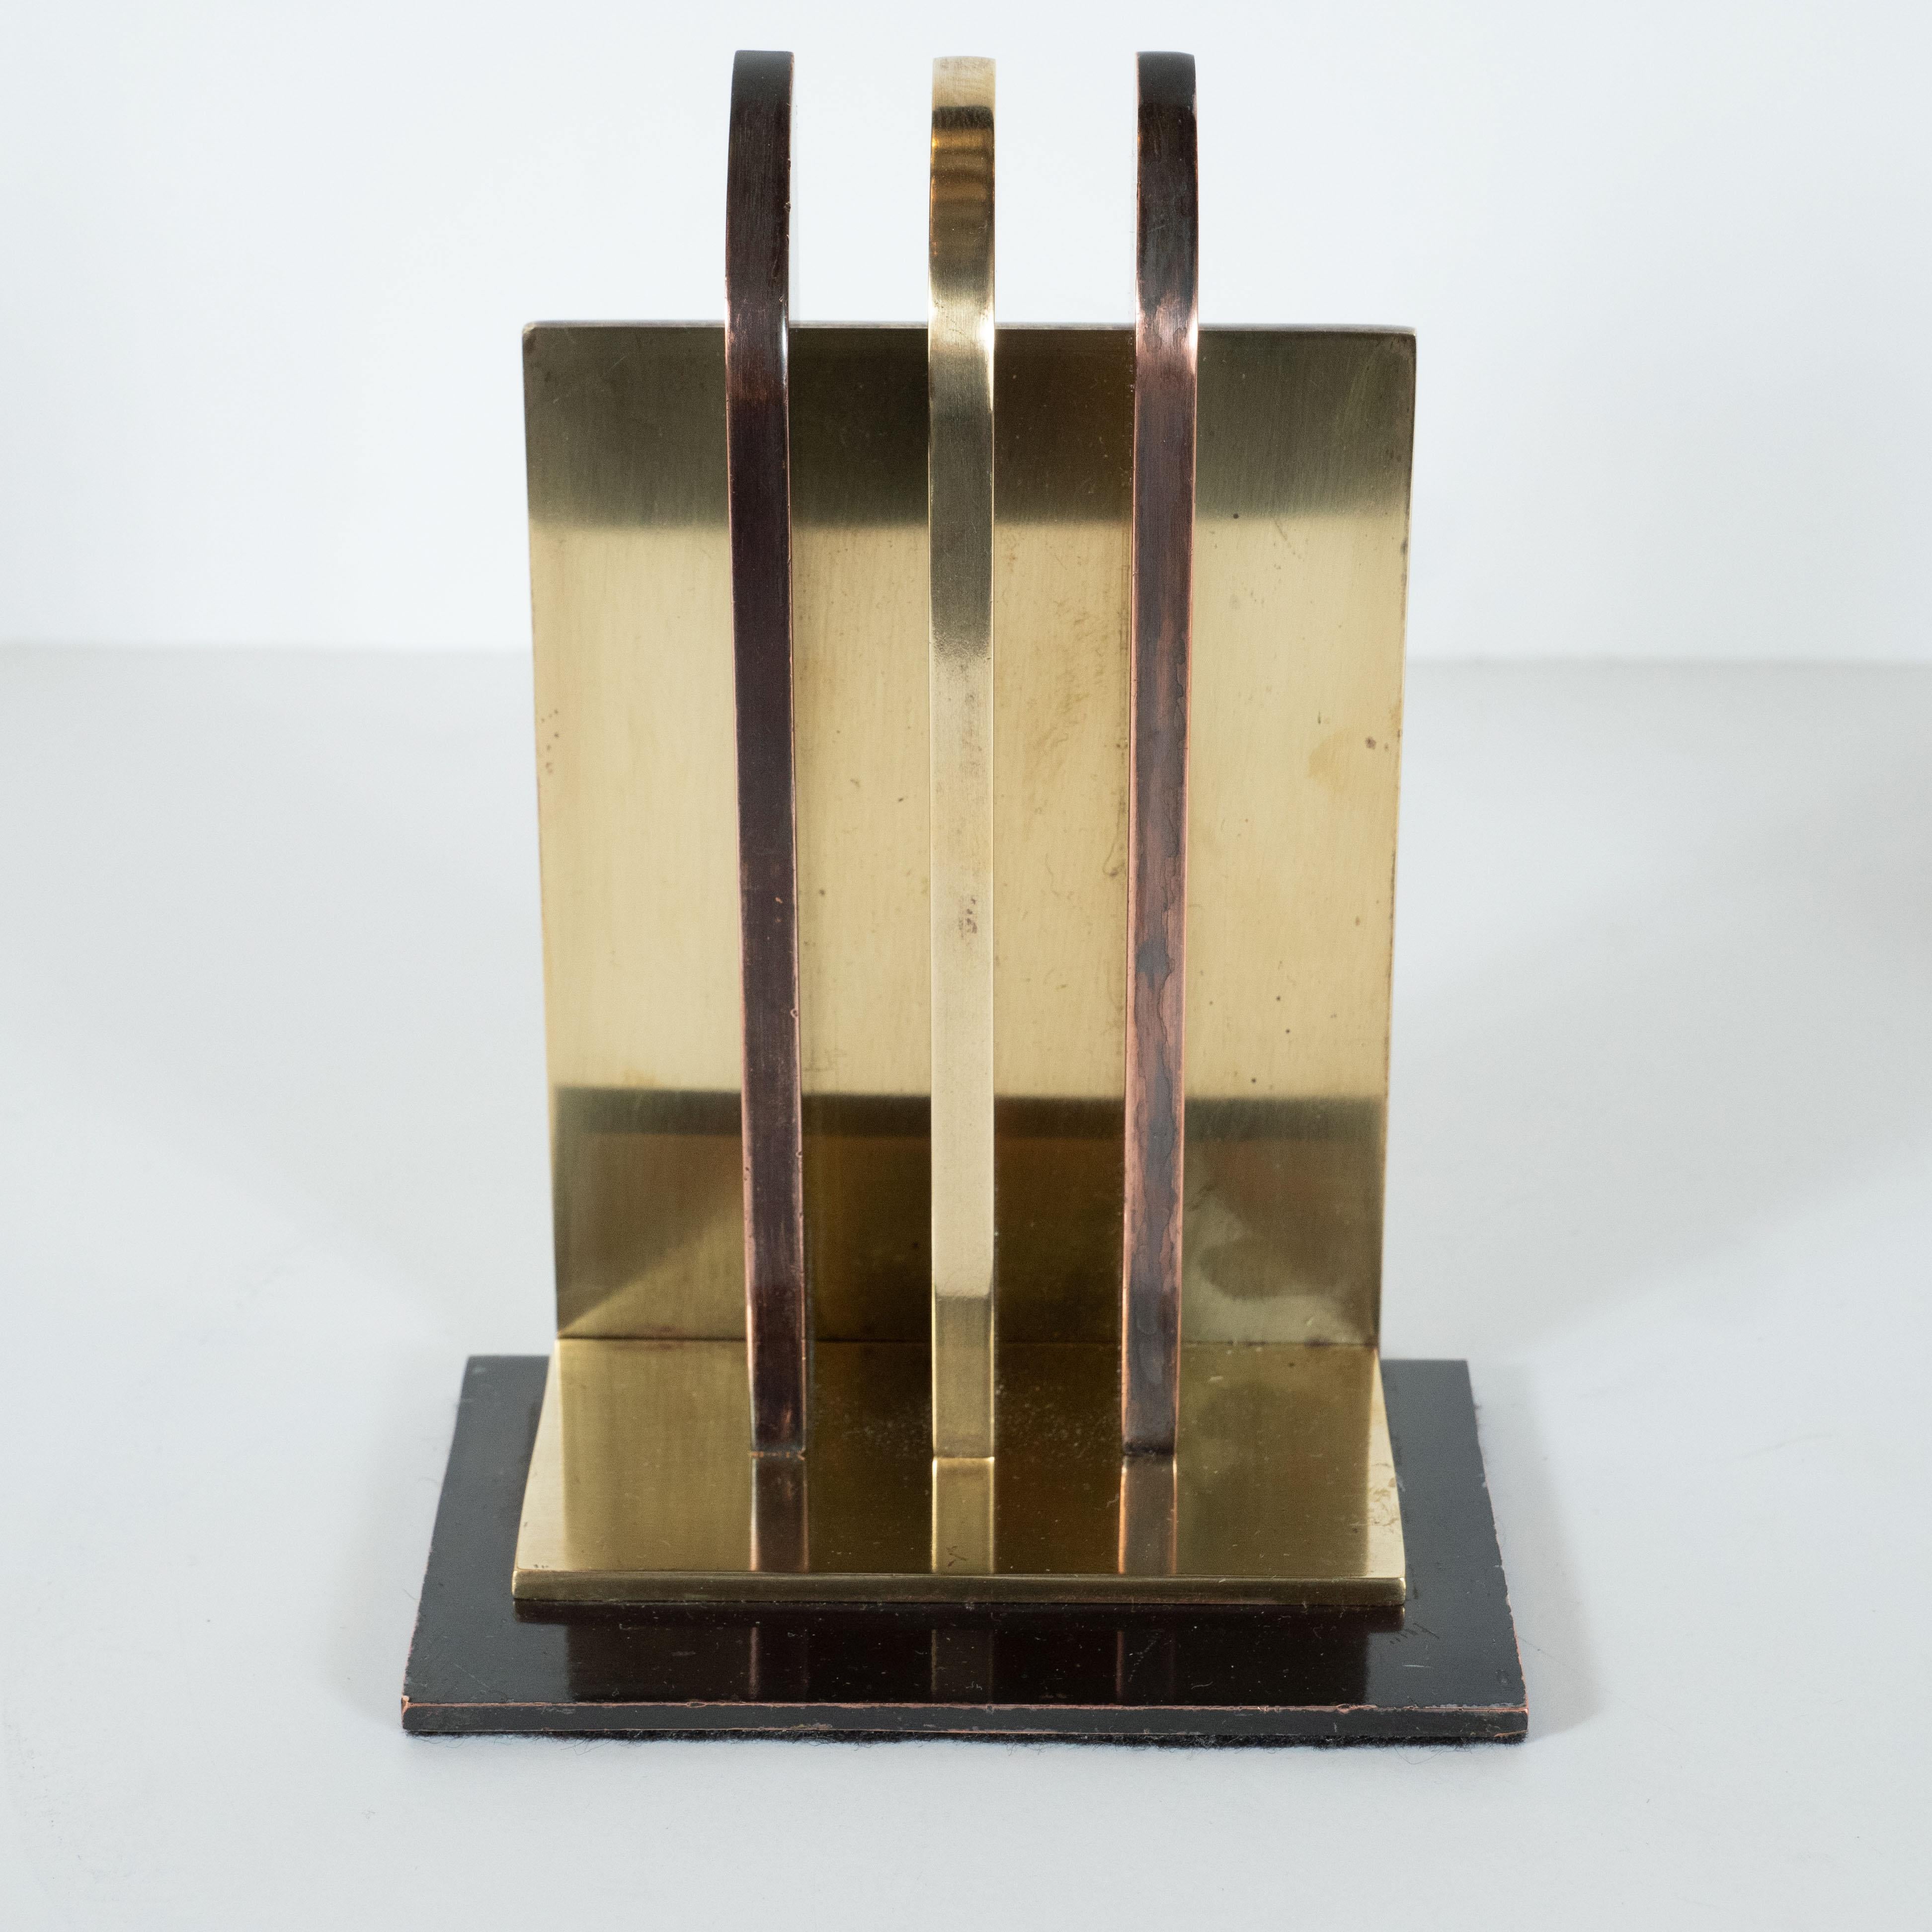 Mid-20th Century Art Deco Streamlined Copper & Brass Bookends by Walter Von Nessen for Chase Co.